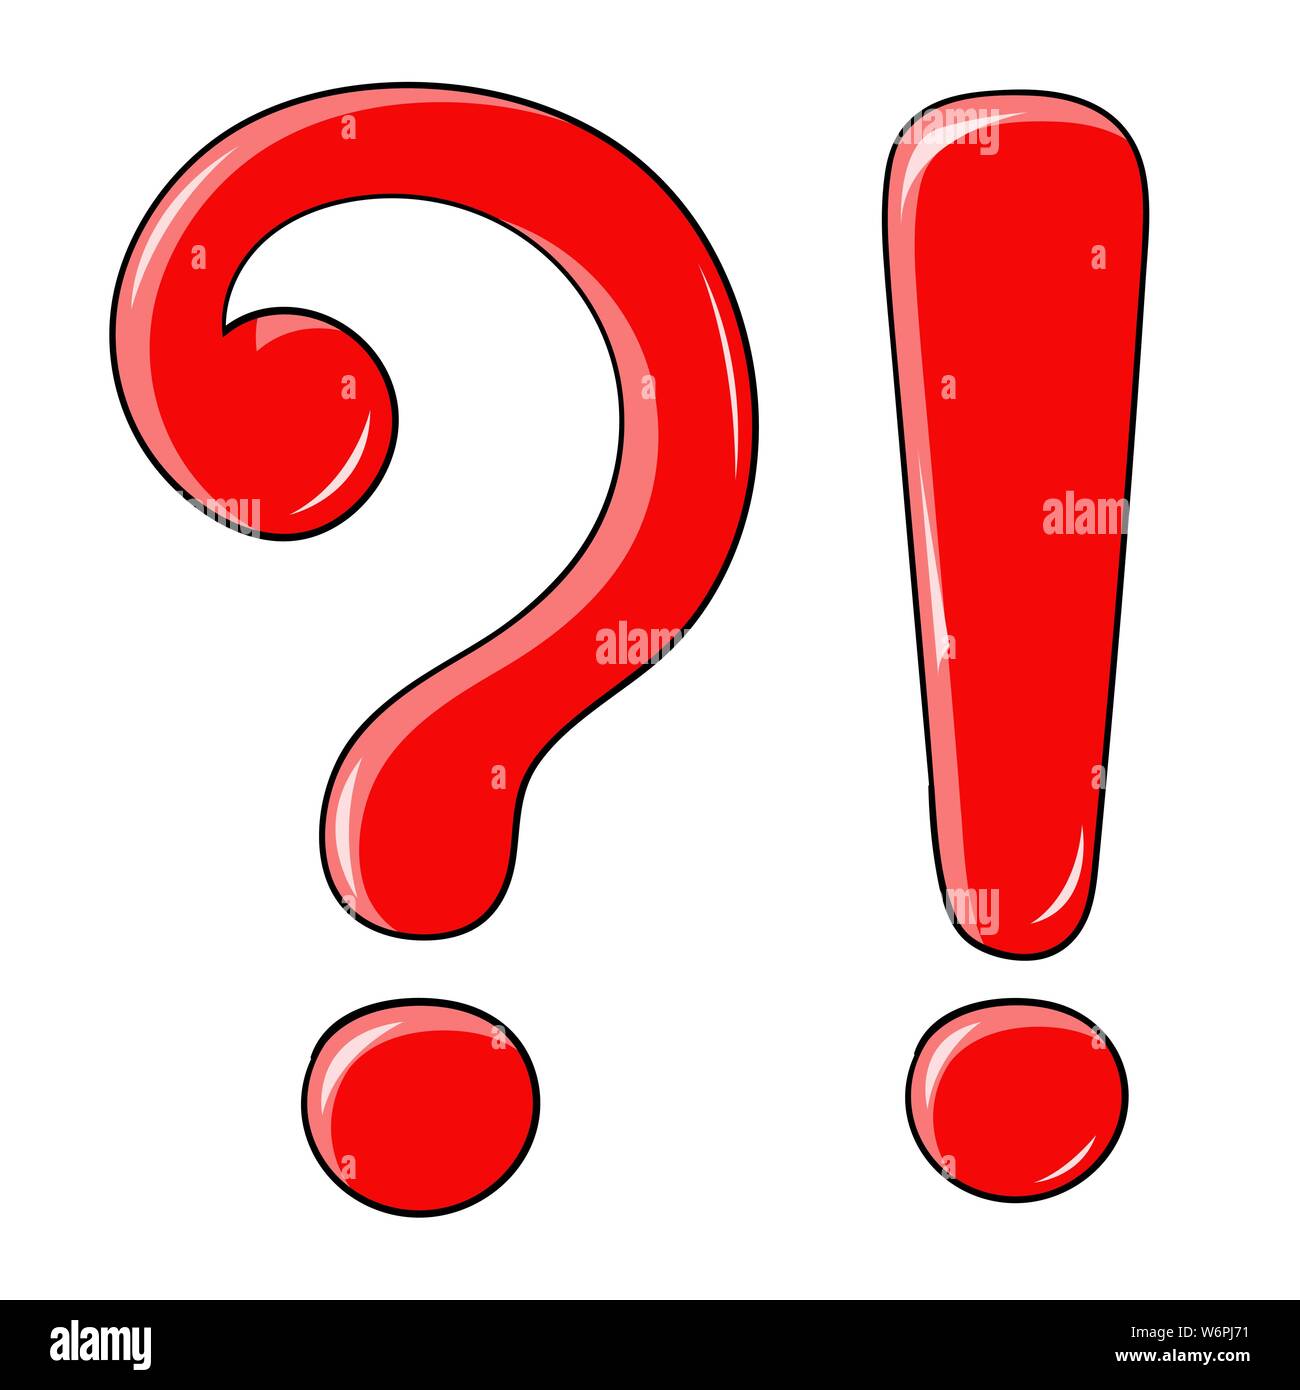 Question and Exlamation marks. Red shiny elements Stock Vector Image ...